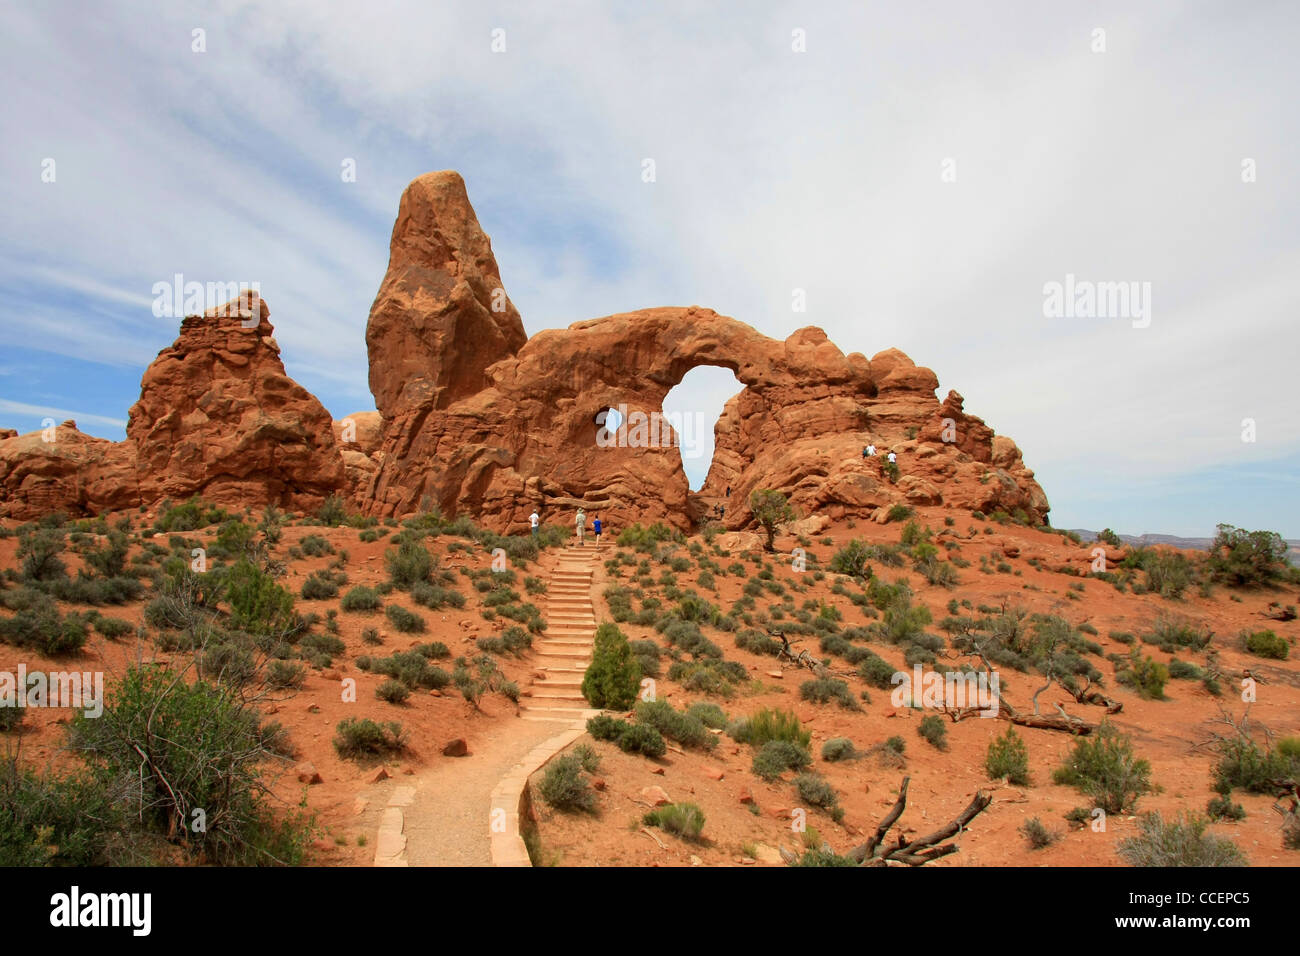 Stones and arches at Arches National Park, Utah Stock Photo